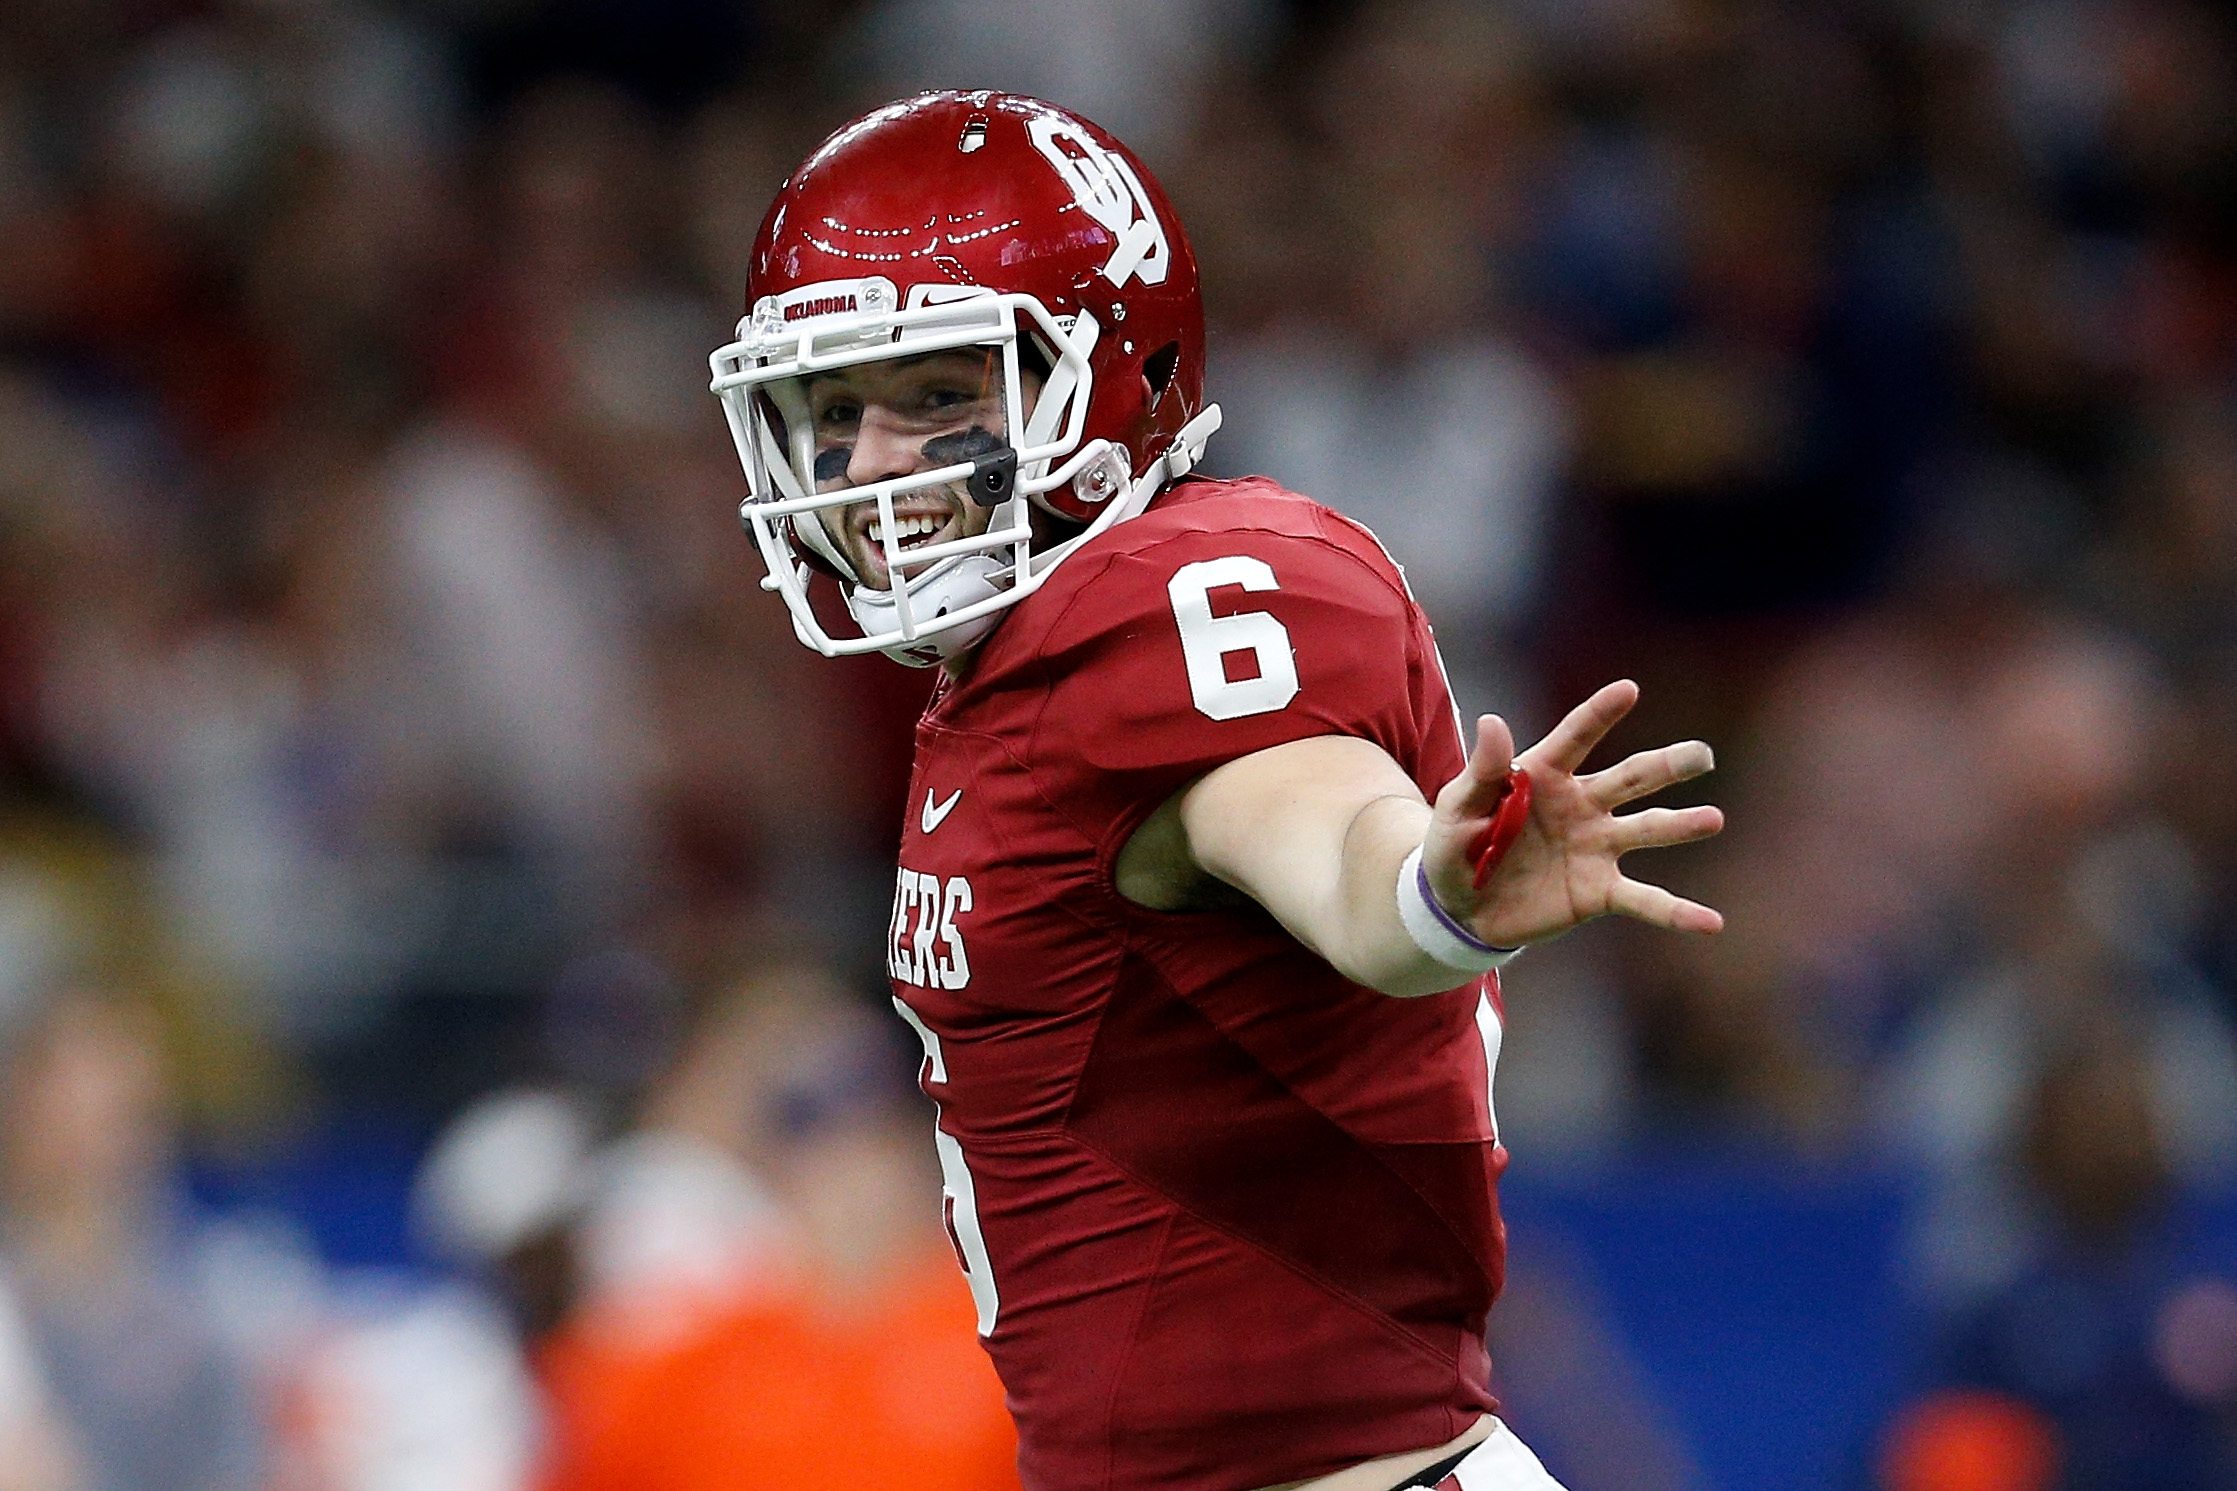 Baker Mayfield celebrates a touchdown during the game.